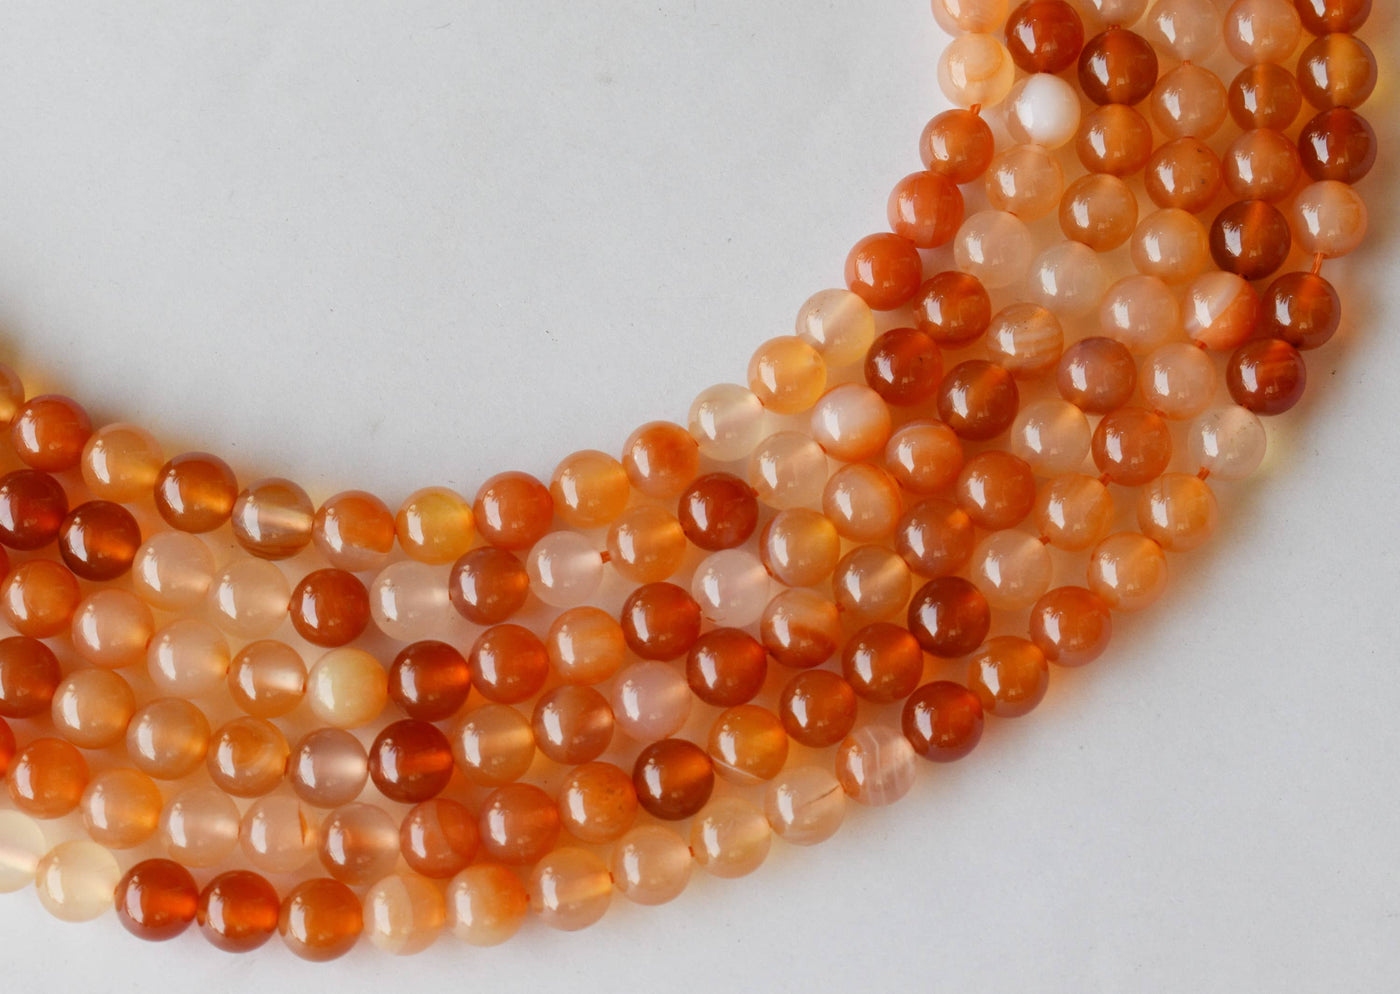 Carnelian Beads, Natural Round Crystal Beads 6mm to 10mm